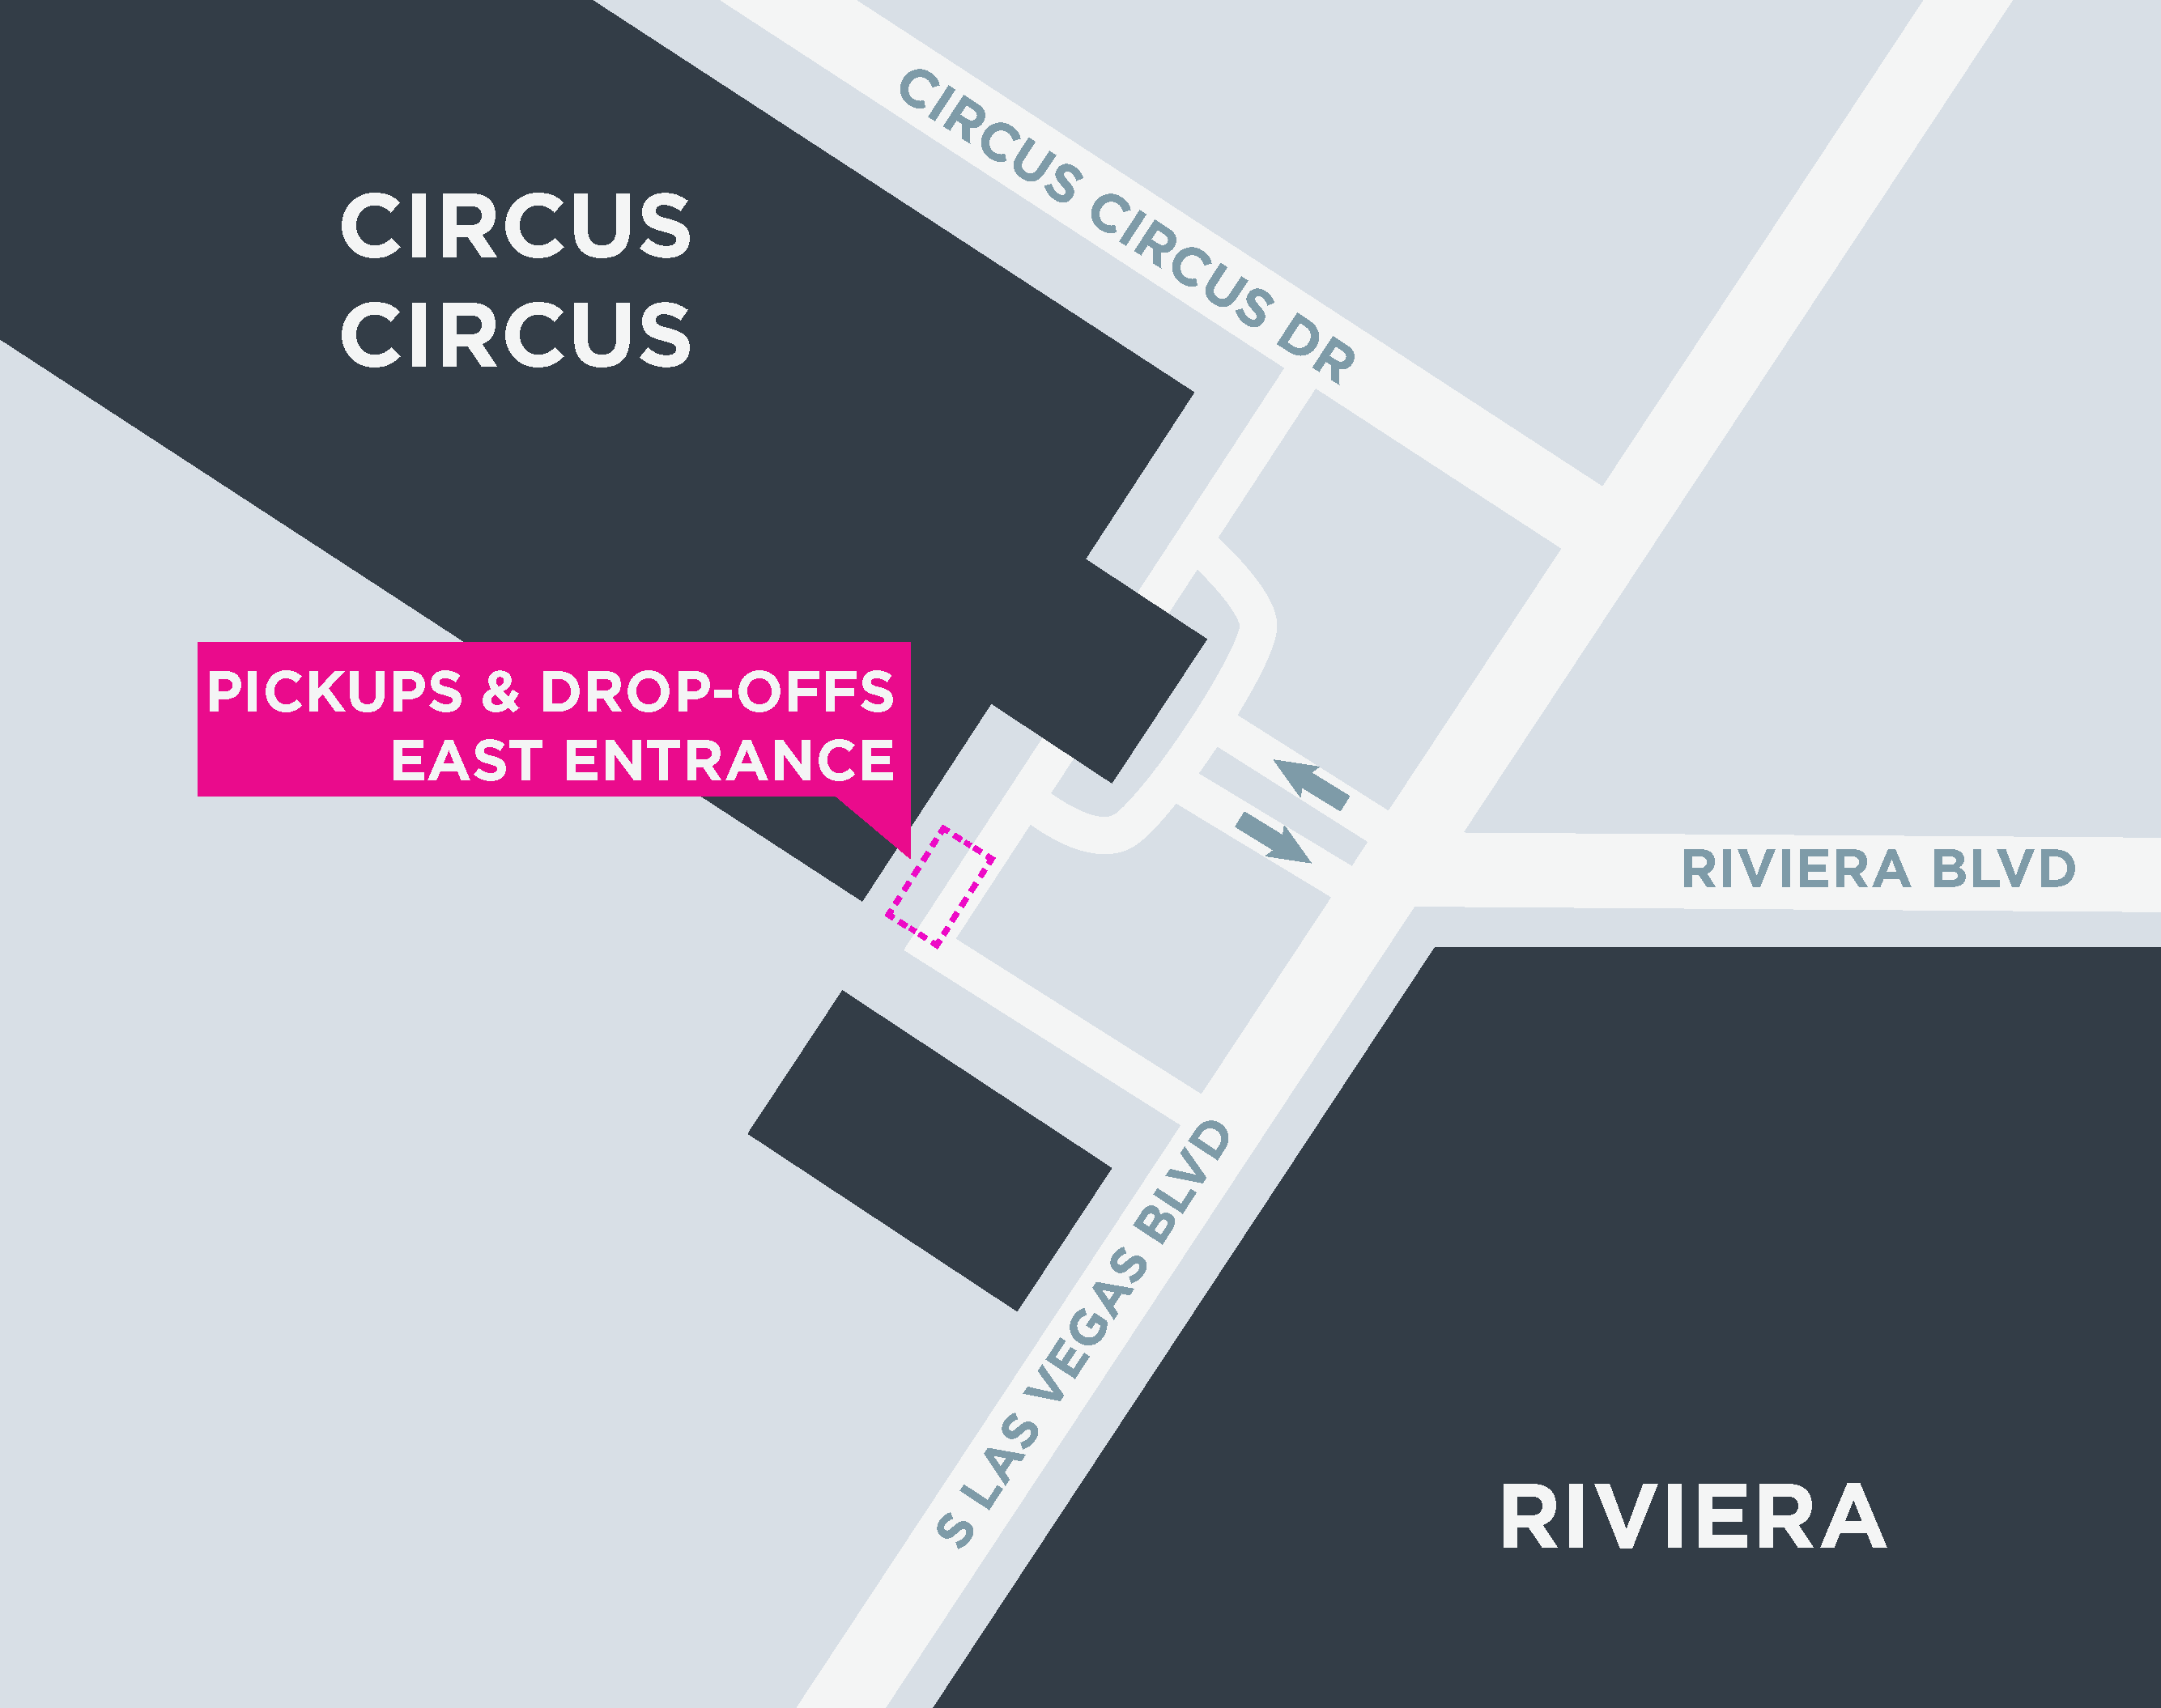 This image shows a map of the Circus Circus, including pickup and dropoff areas.